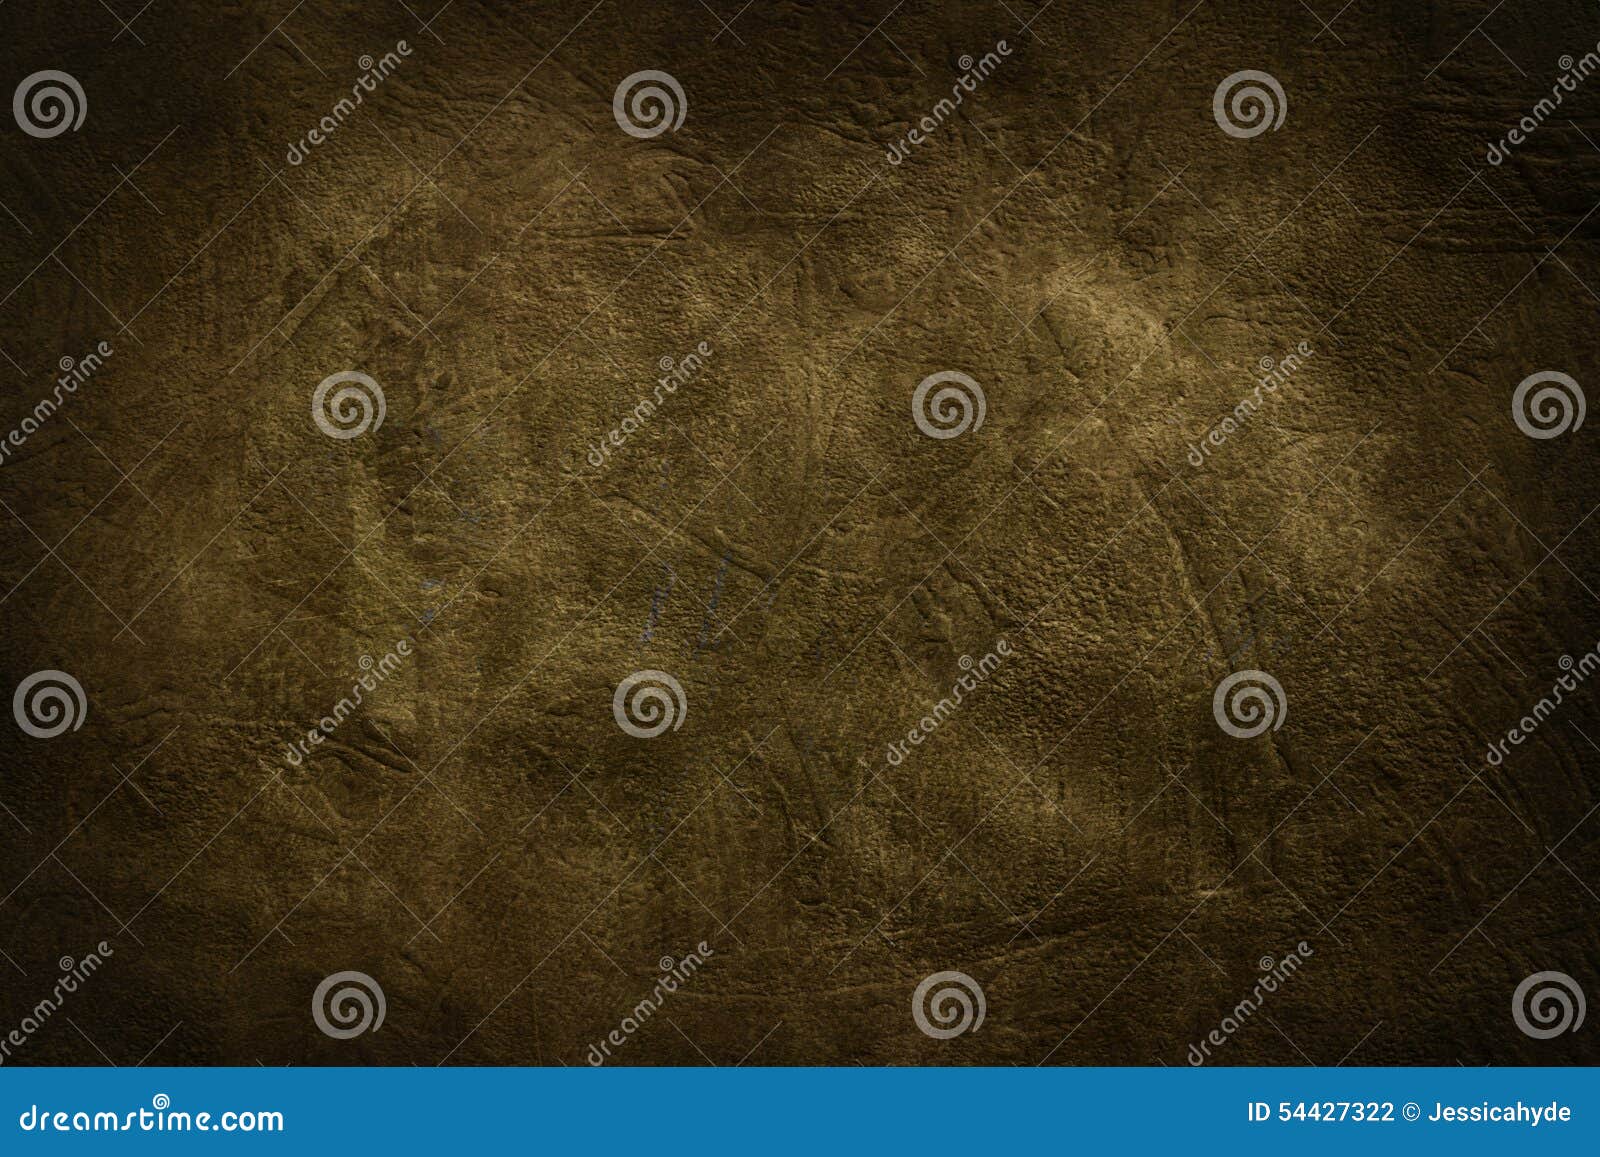 Abstract Background or Texture Stock Photo - Image of abstract, golden